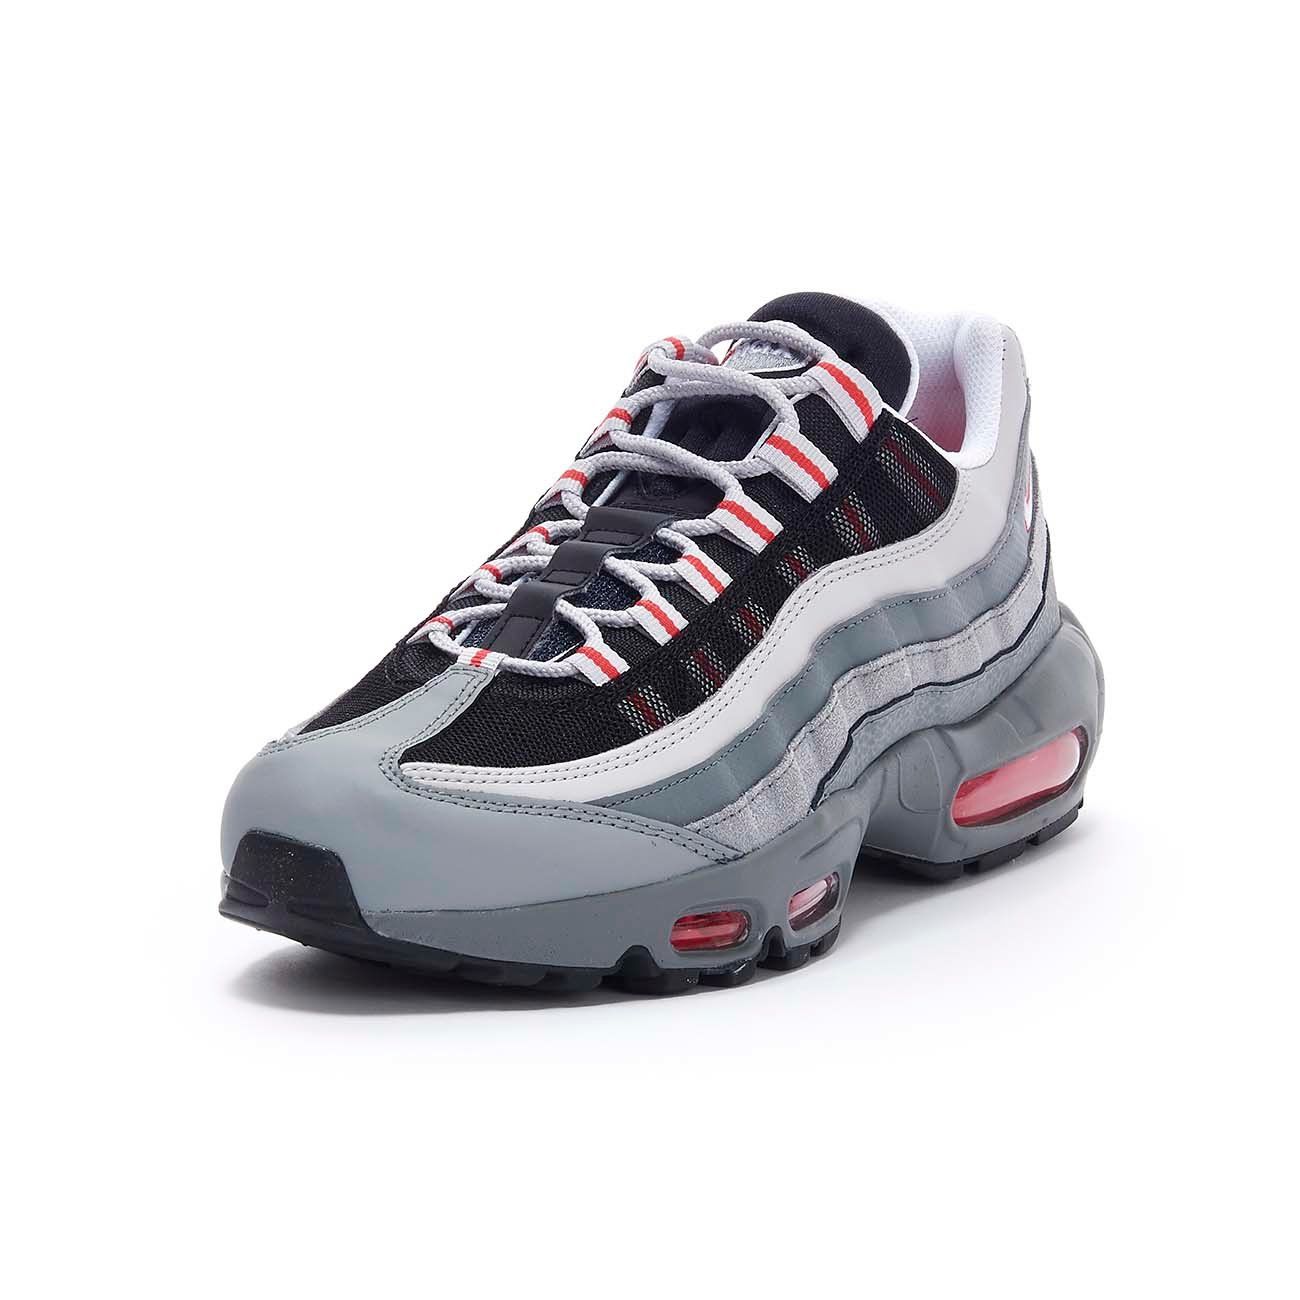 SNEAKER AIR MAX 95 ESSENTIAL Man Track red White Particle grey 2105826825863